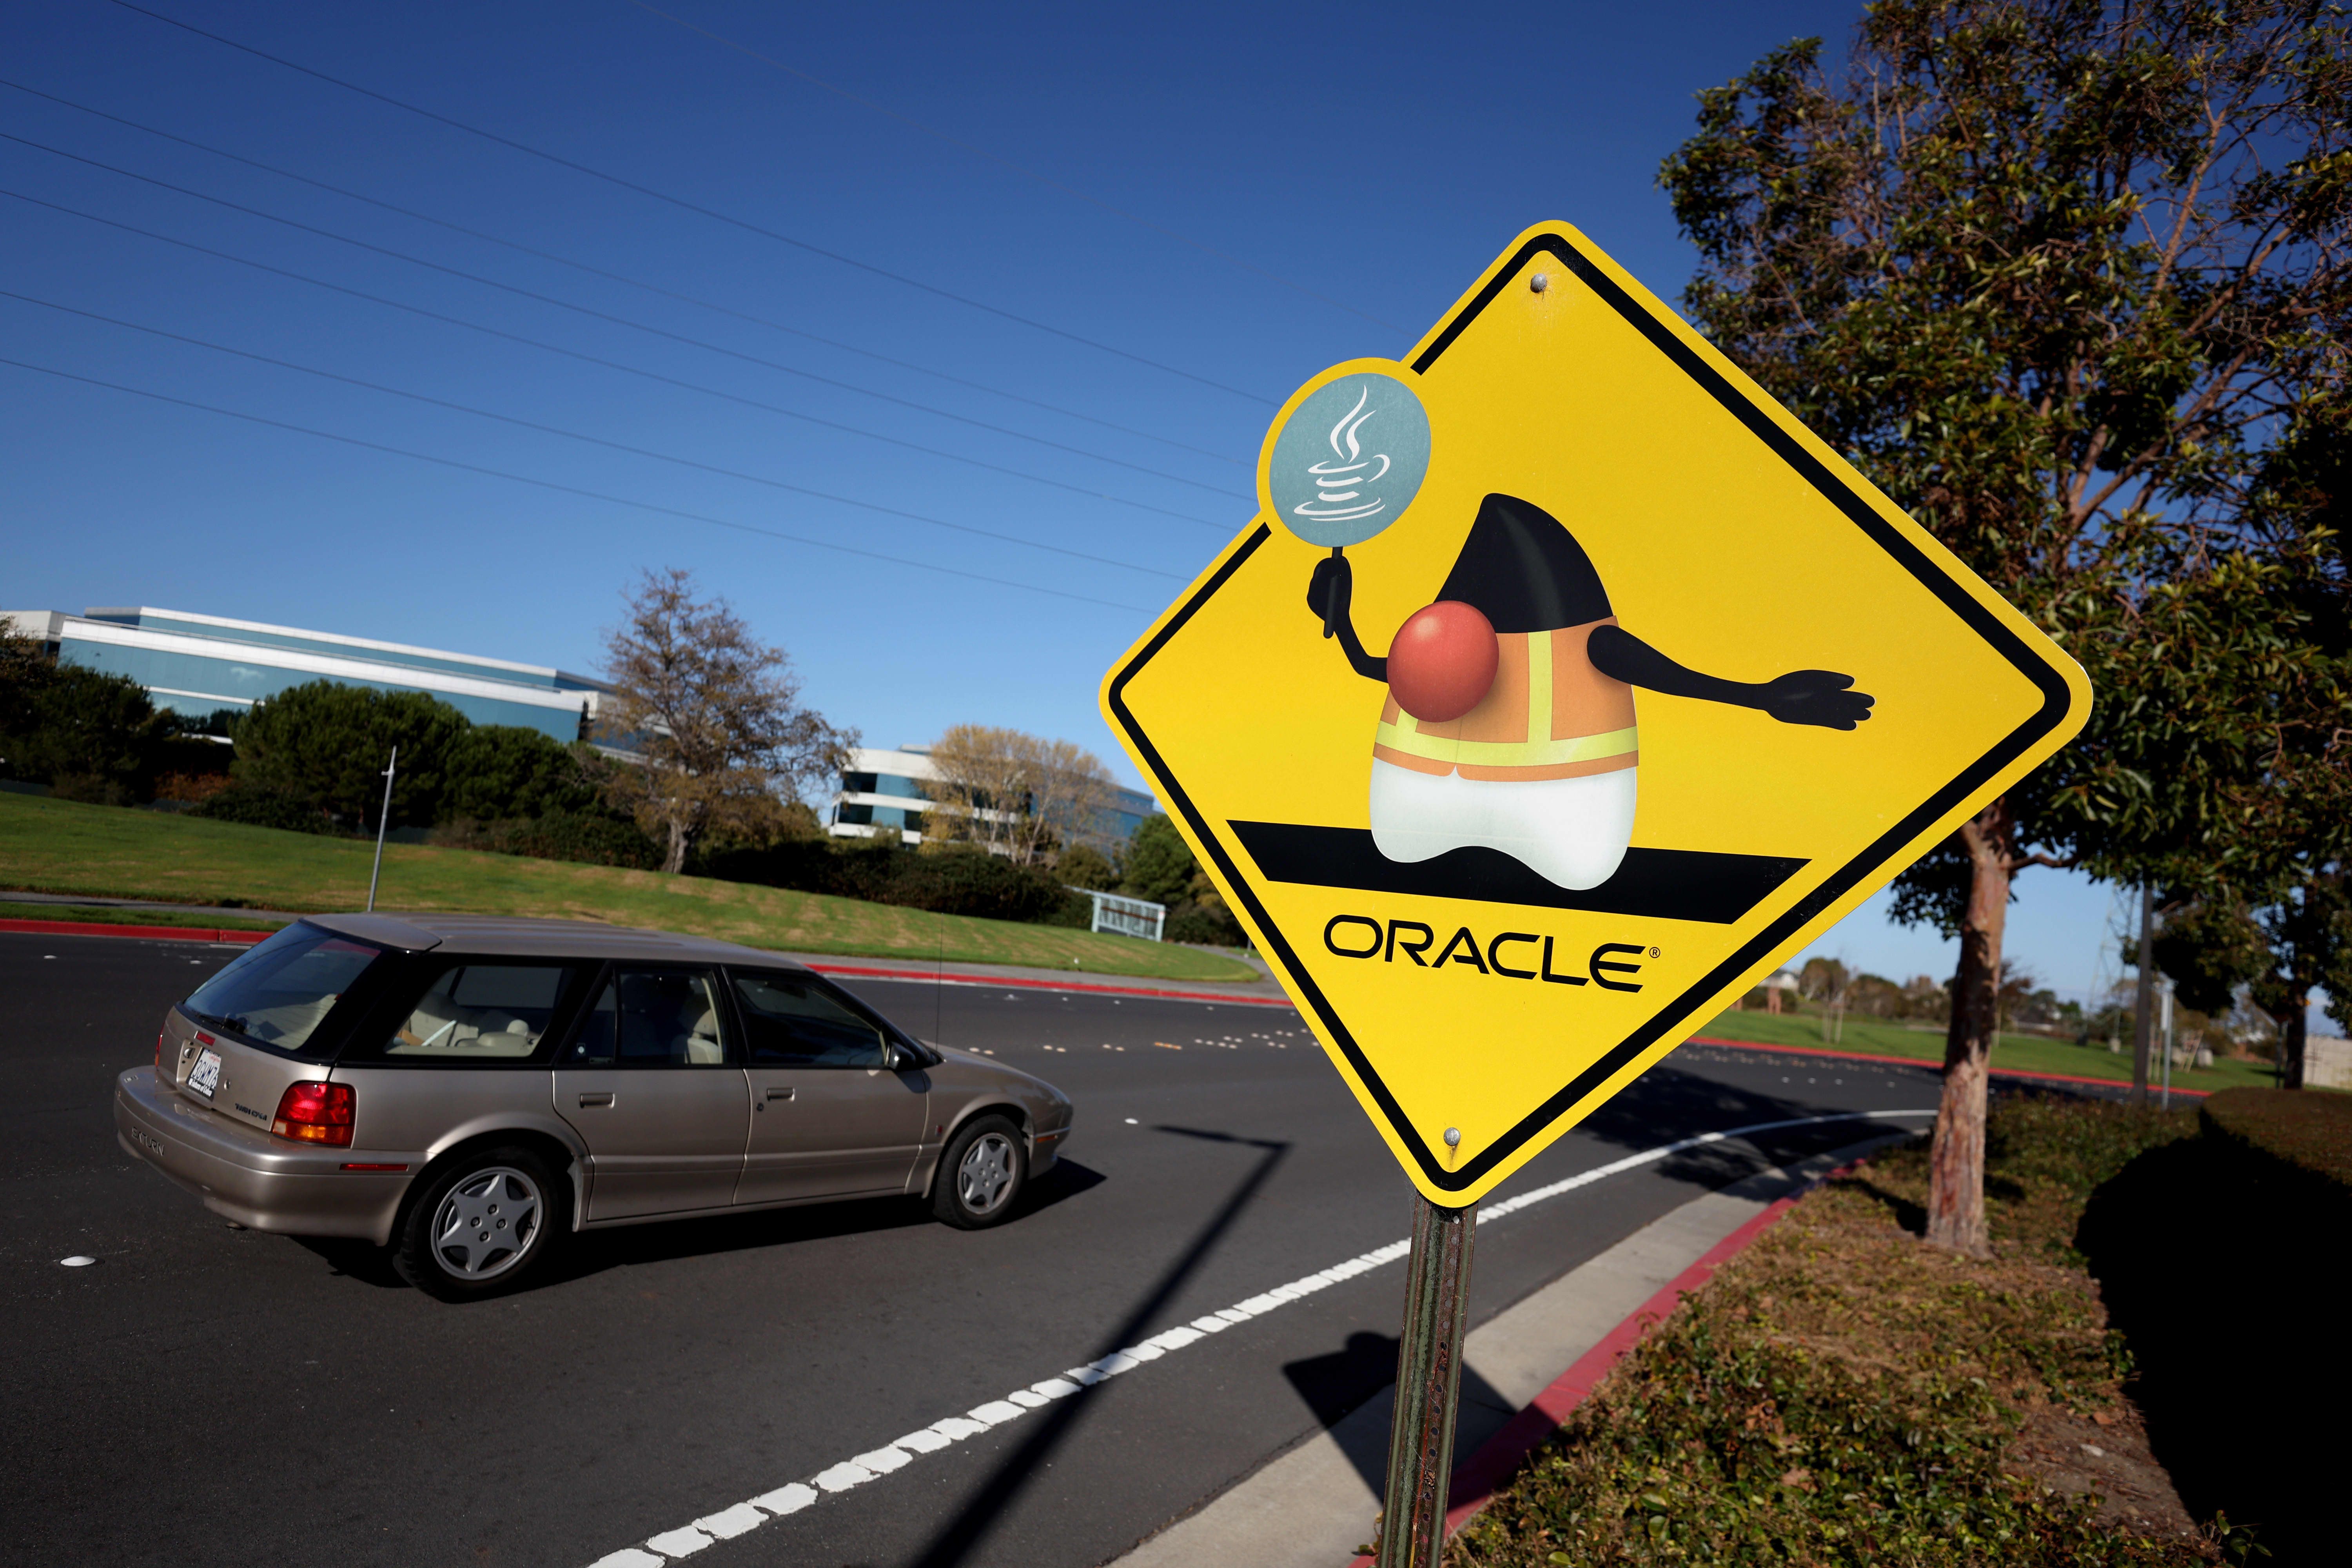 Oracle’s earnings report flashes warning sign for tech sector as equity investments take a hit